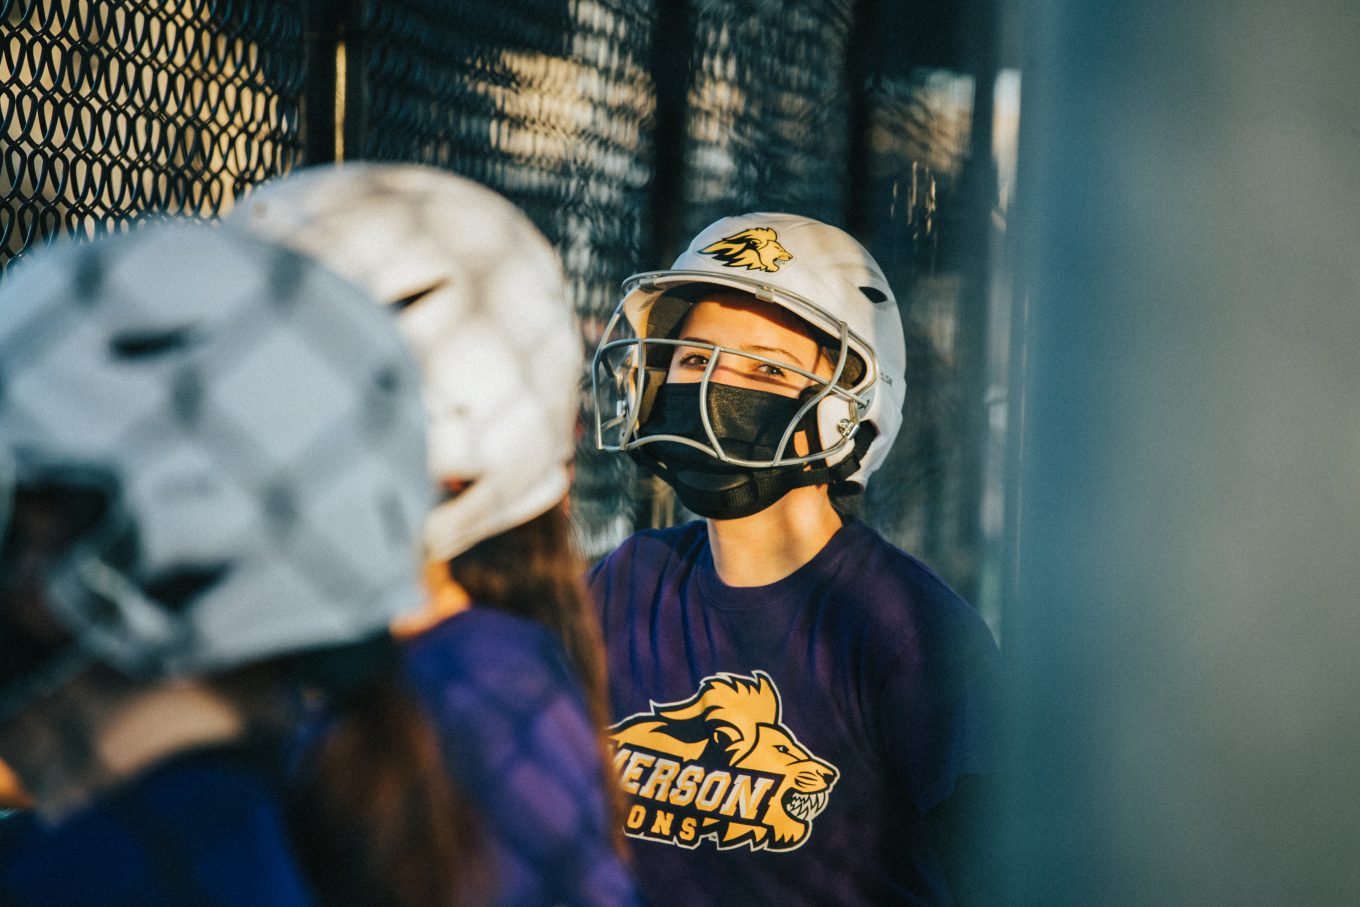 Softball player wearing a helmet and an Emerson Lions t-shirt standing by a fence during softball practice